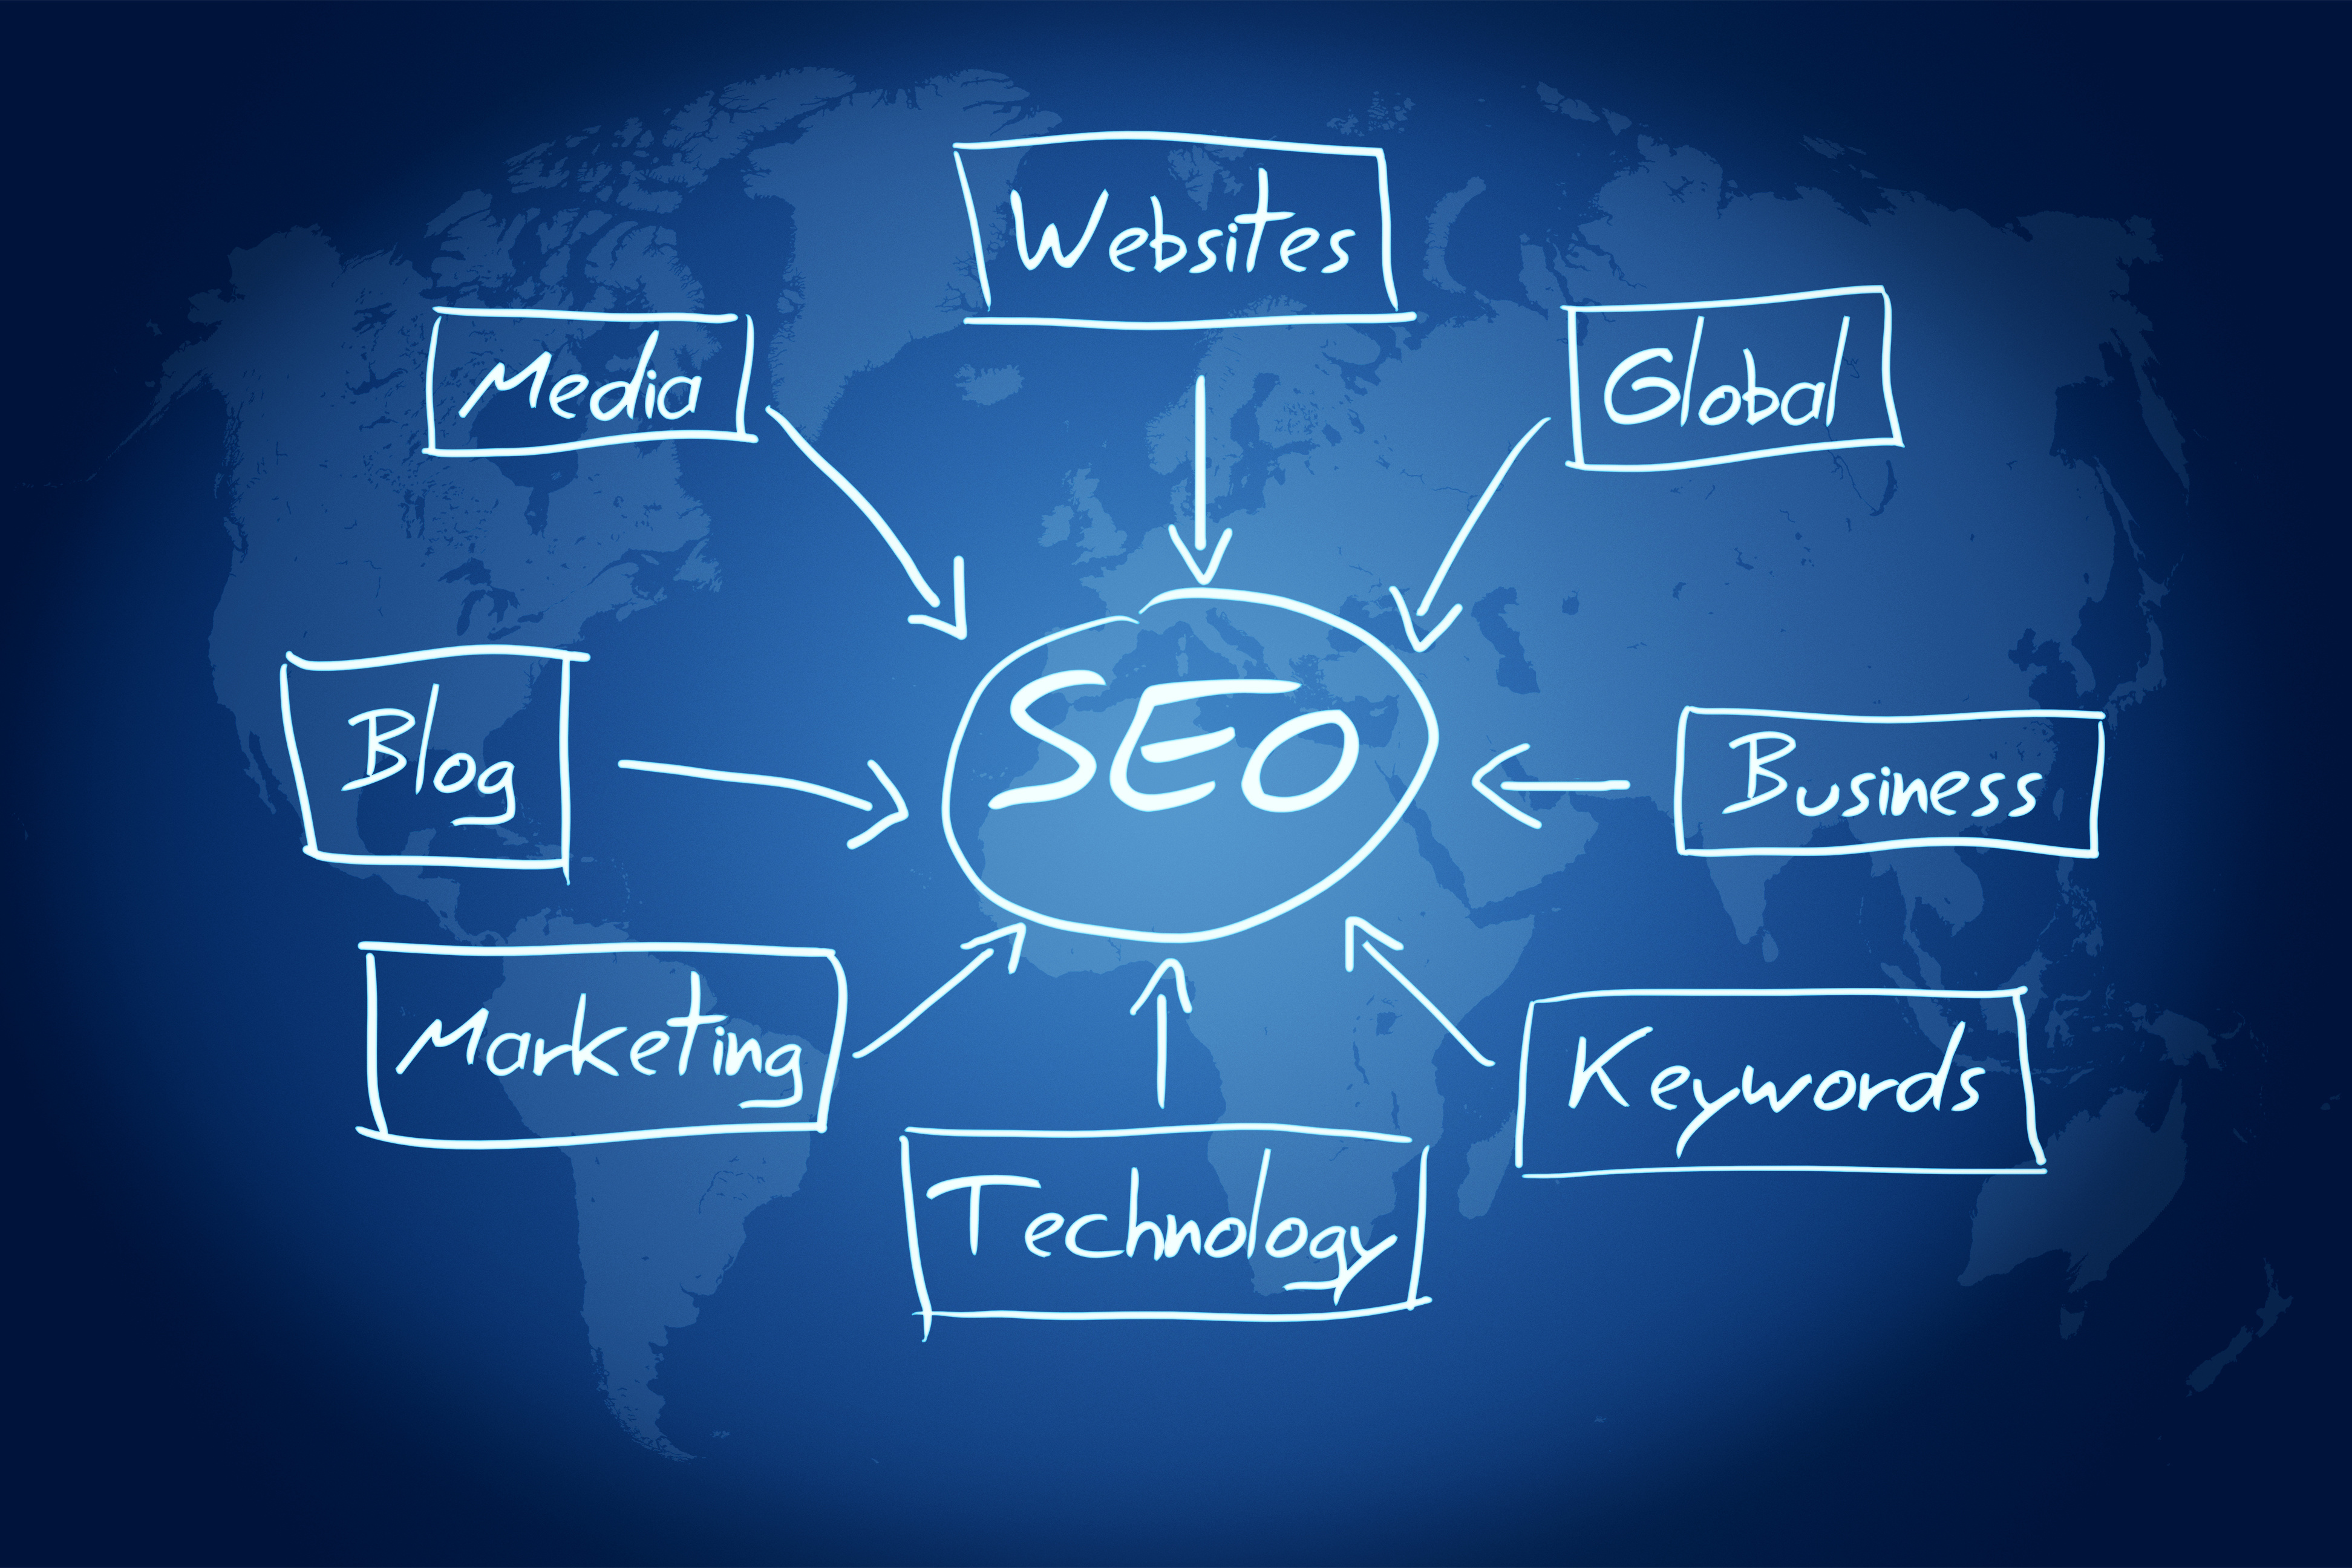 Your Global SEO Strategy: A step-by-step guide